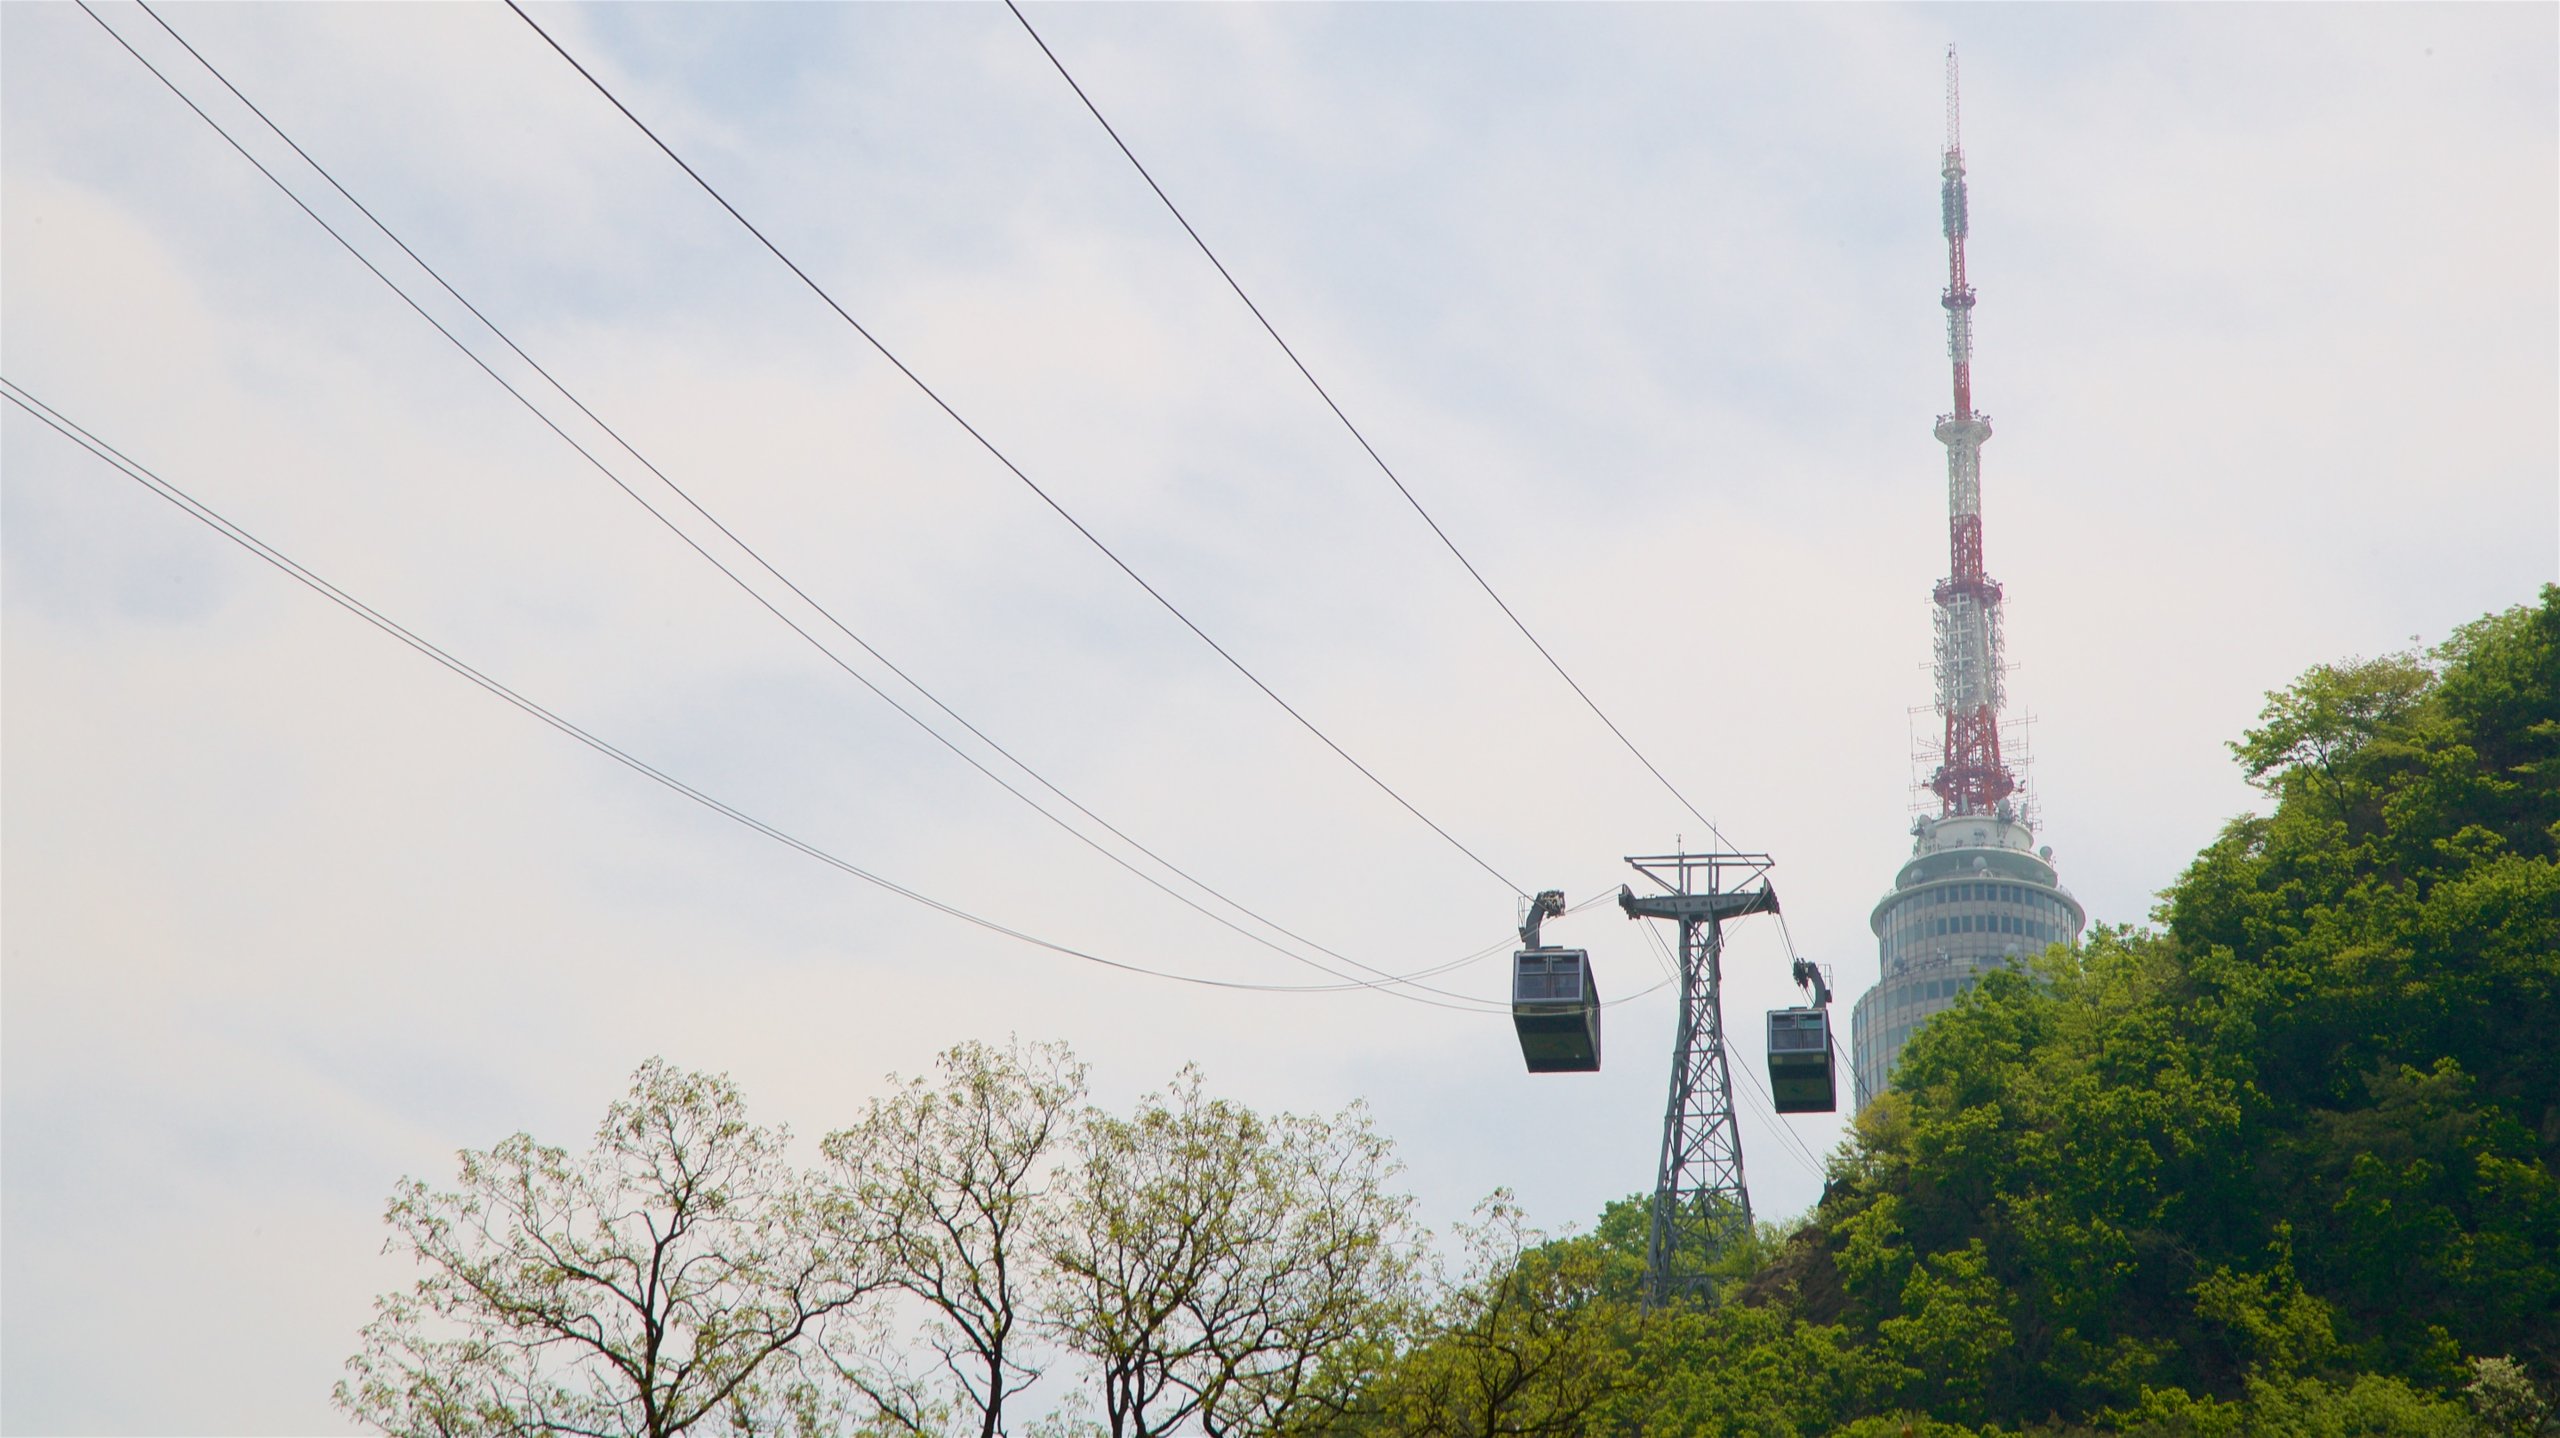 cable car leading up to tower surrounded by trees